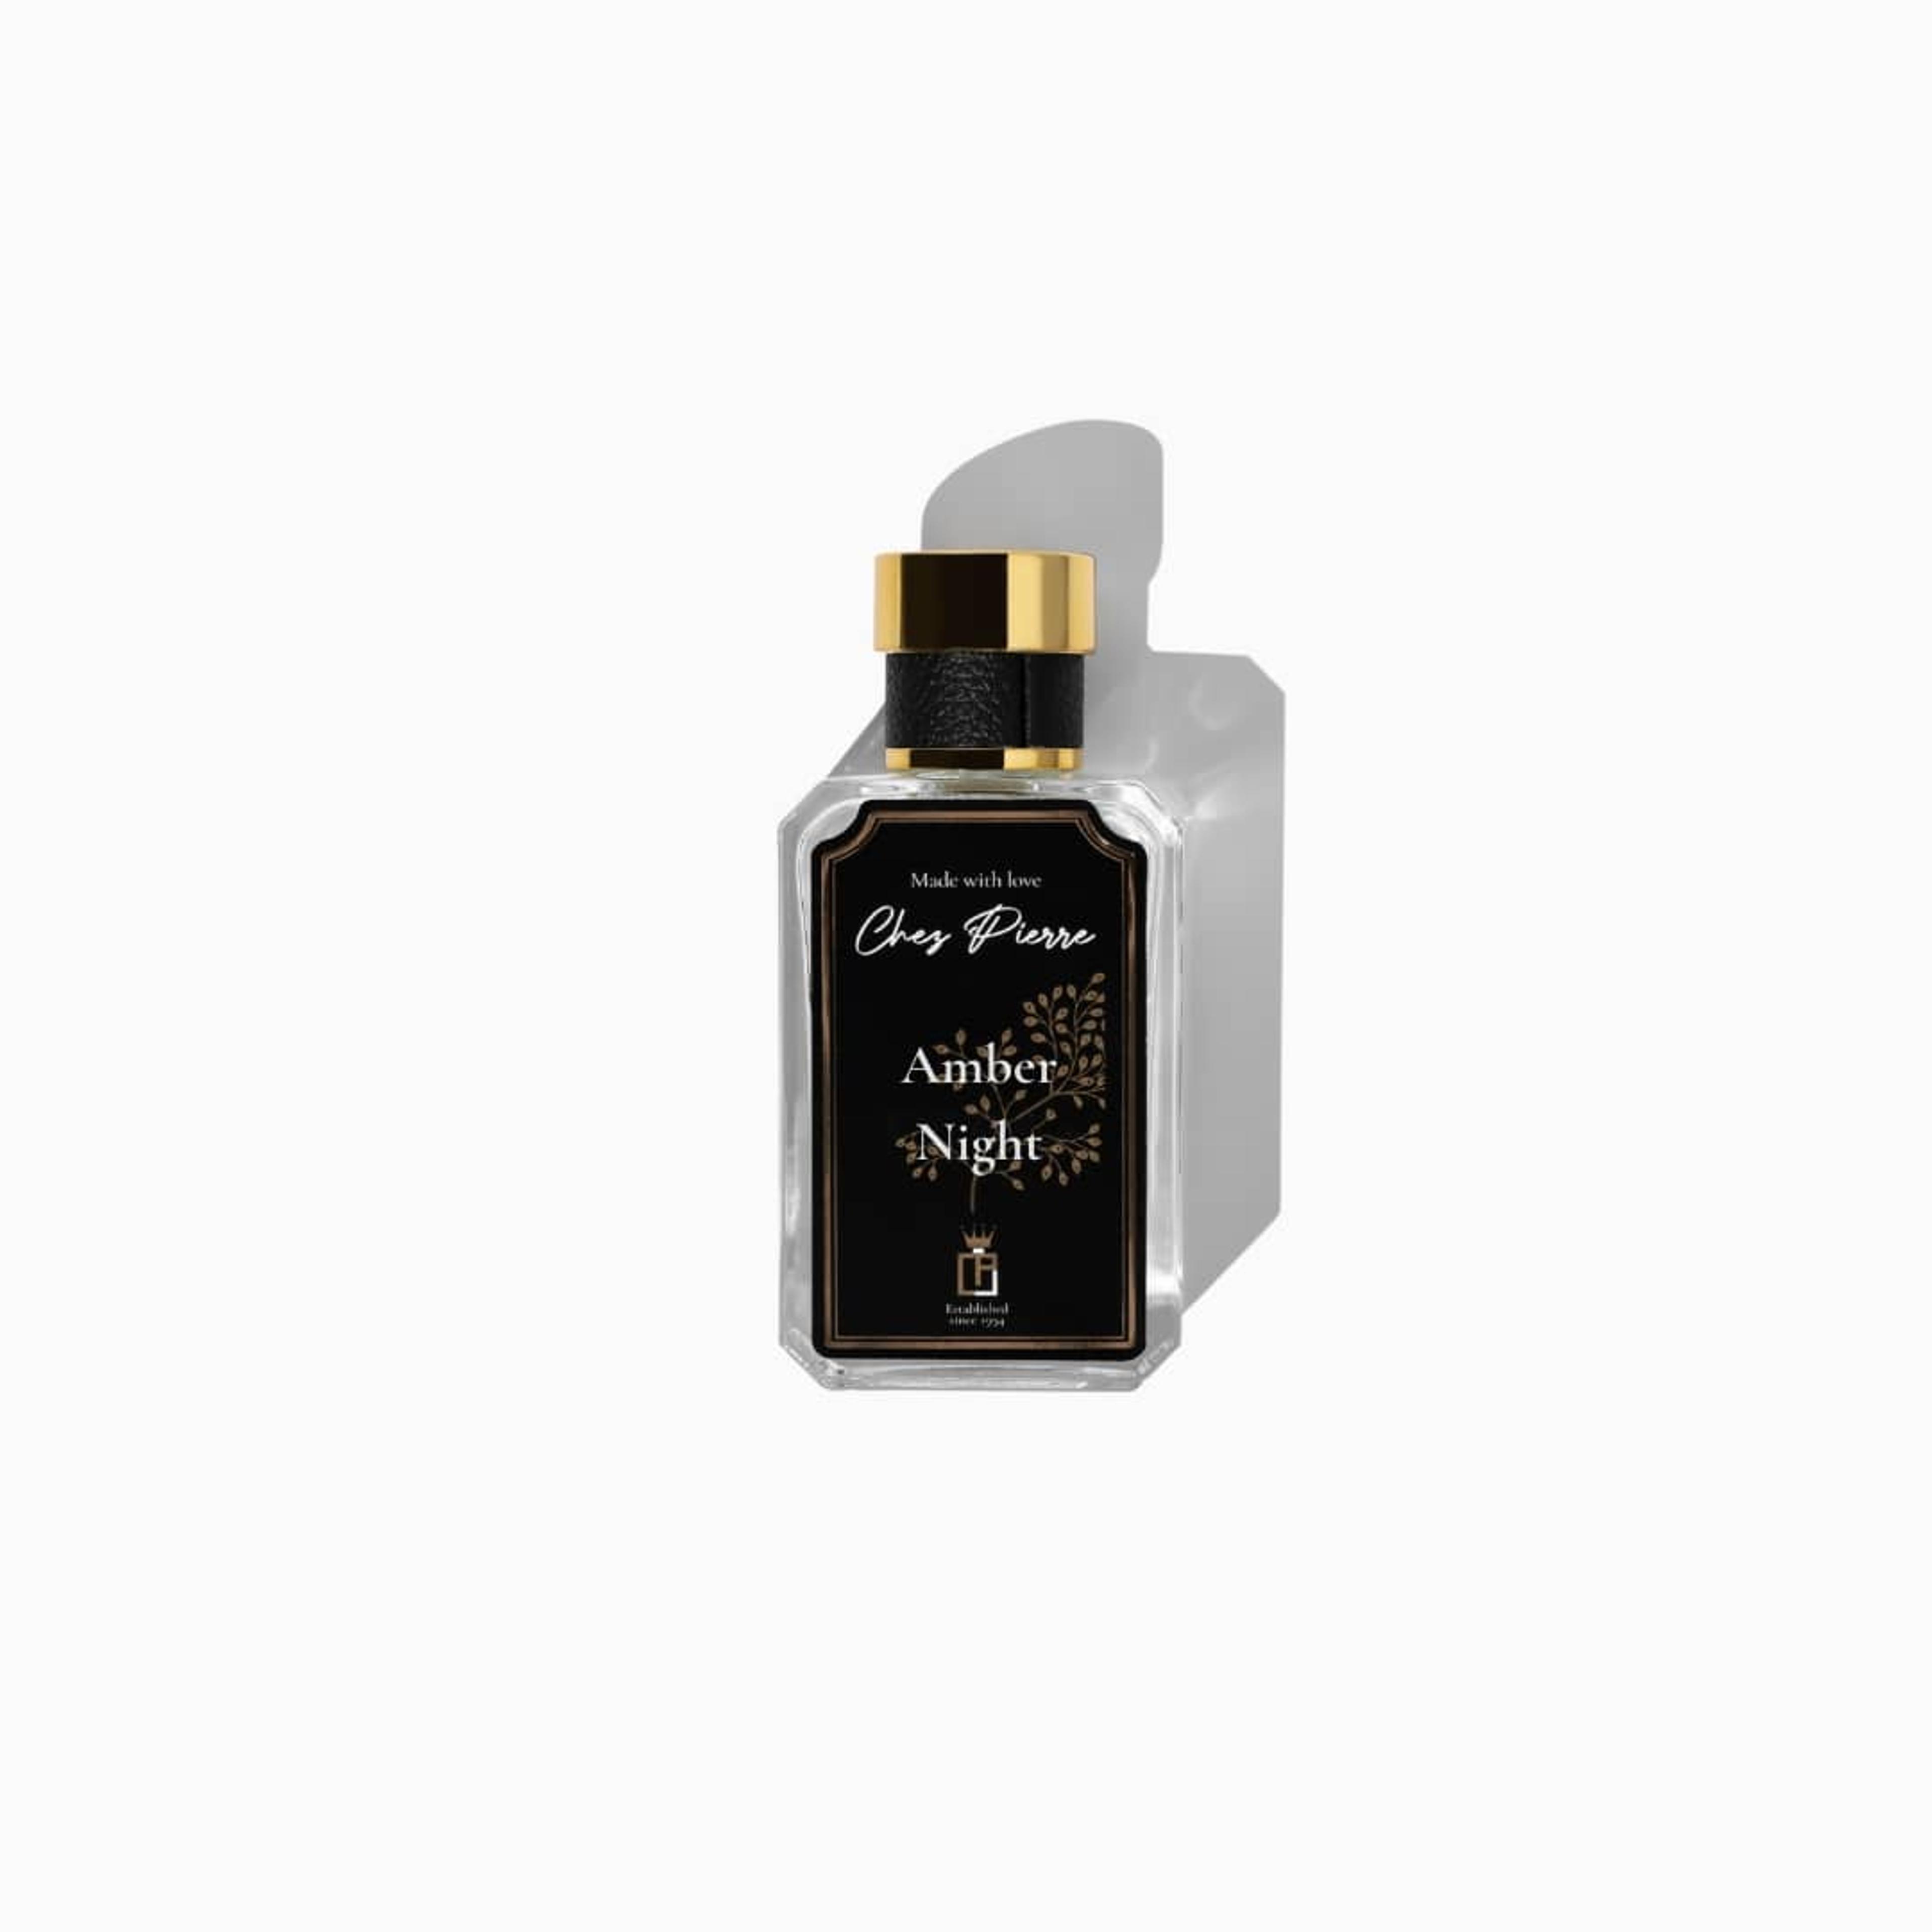 Chez Pierre's Amber Night Perfume Inspired By Ambre Nuit EDP